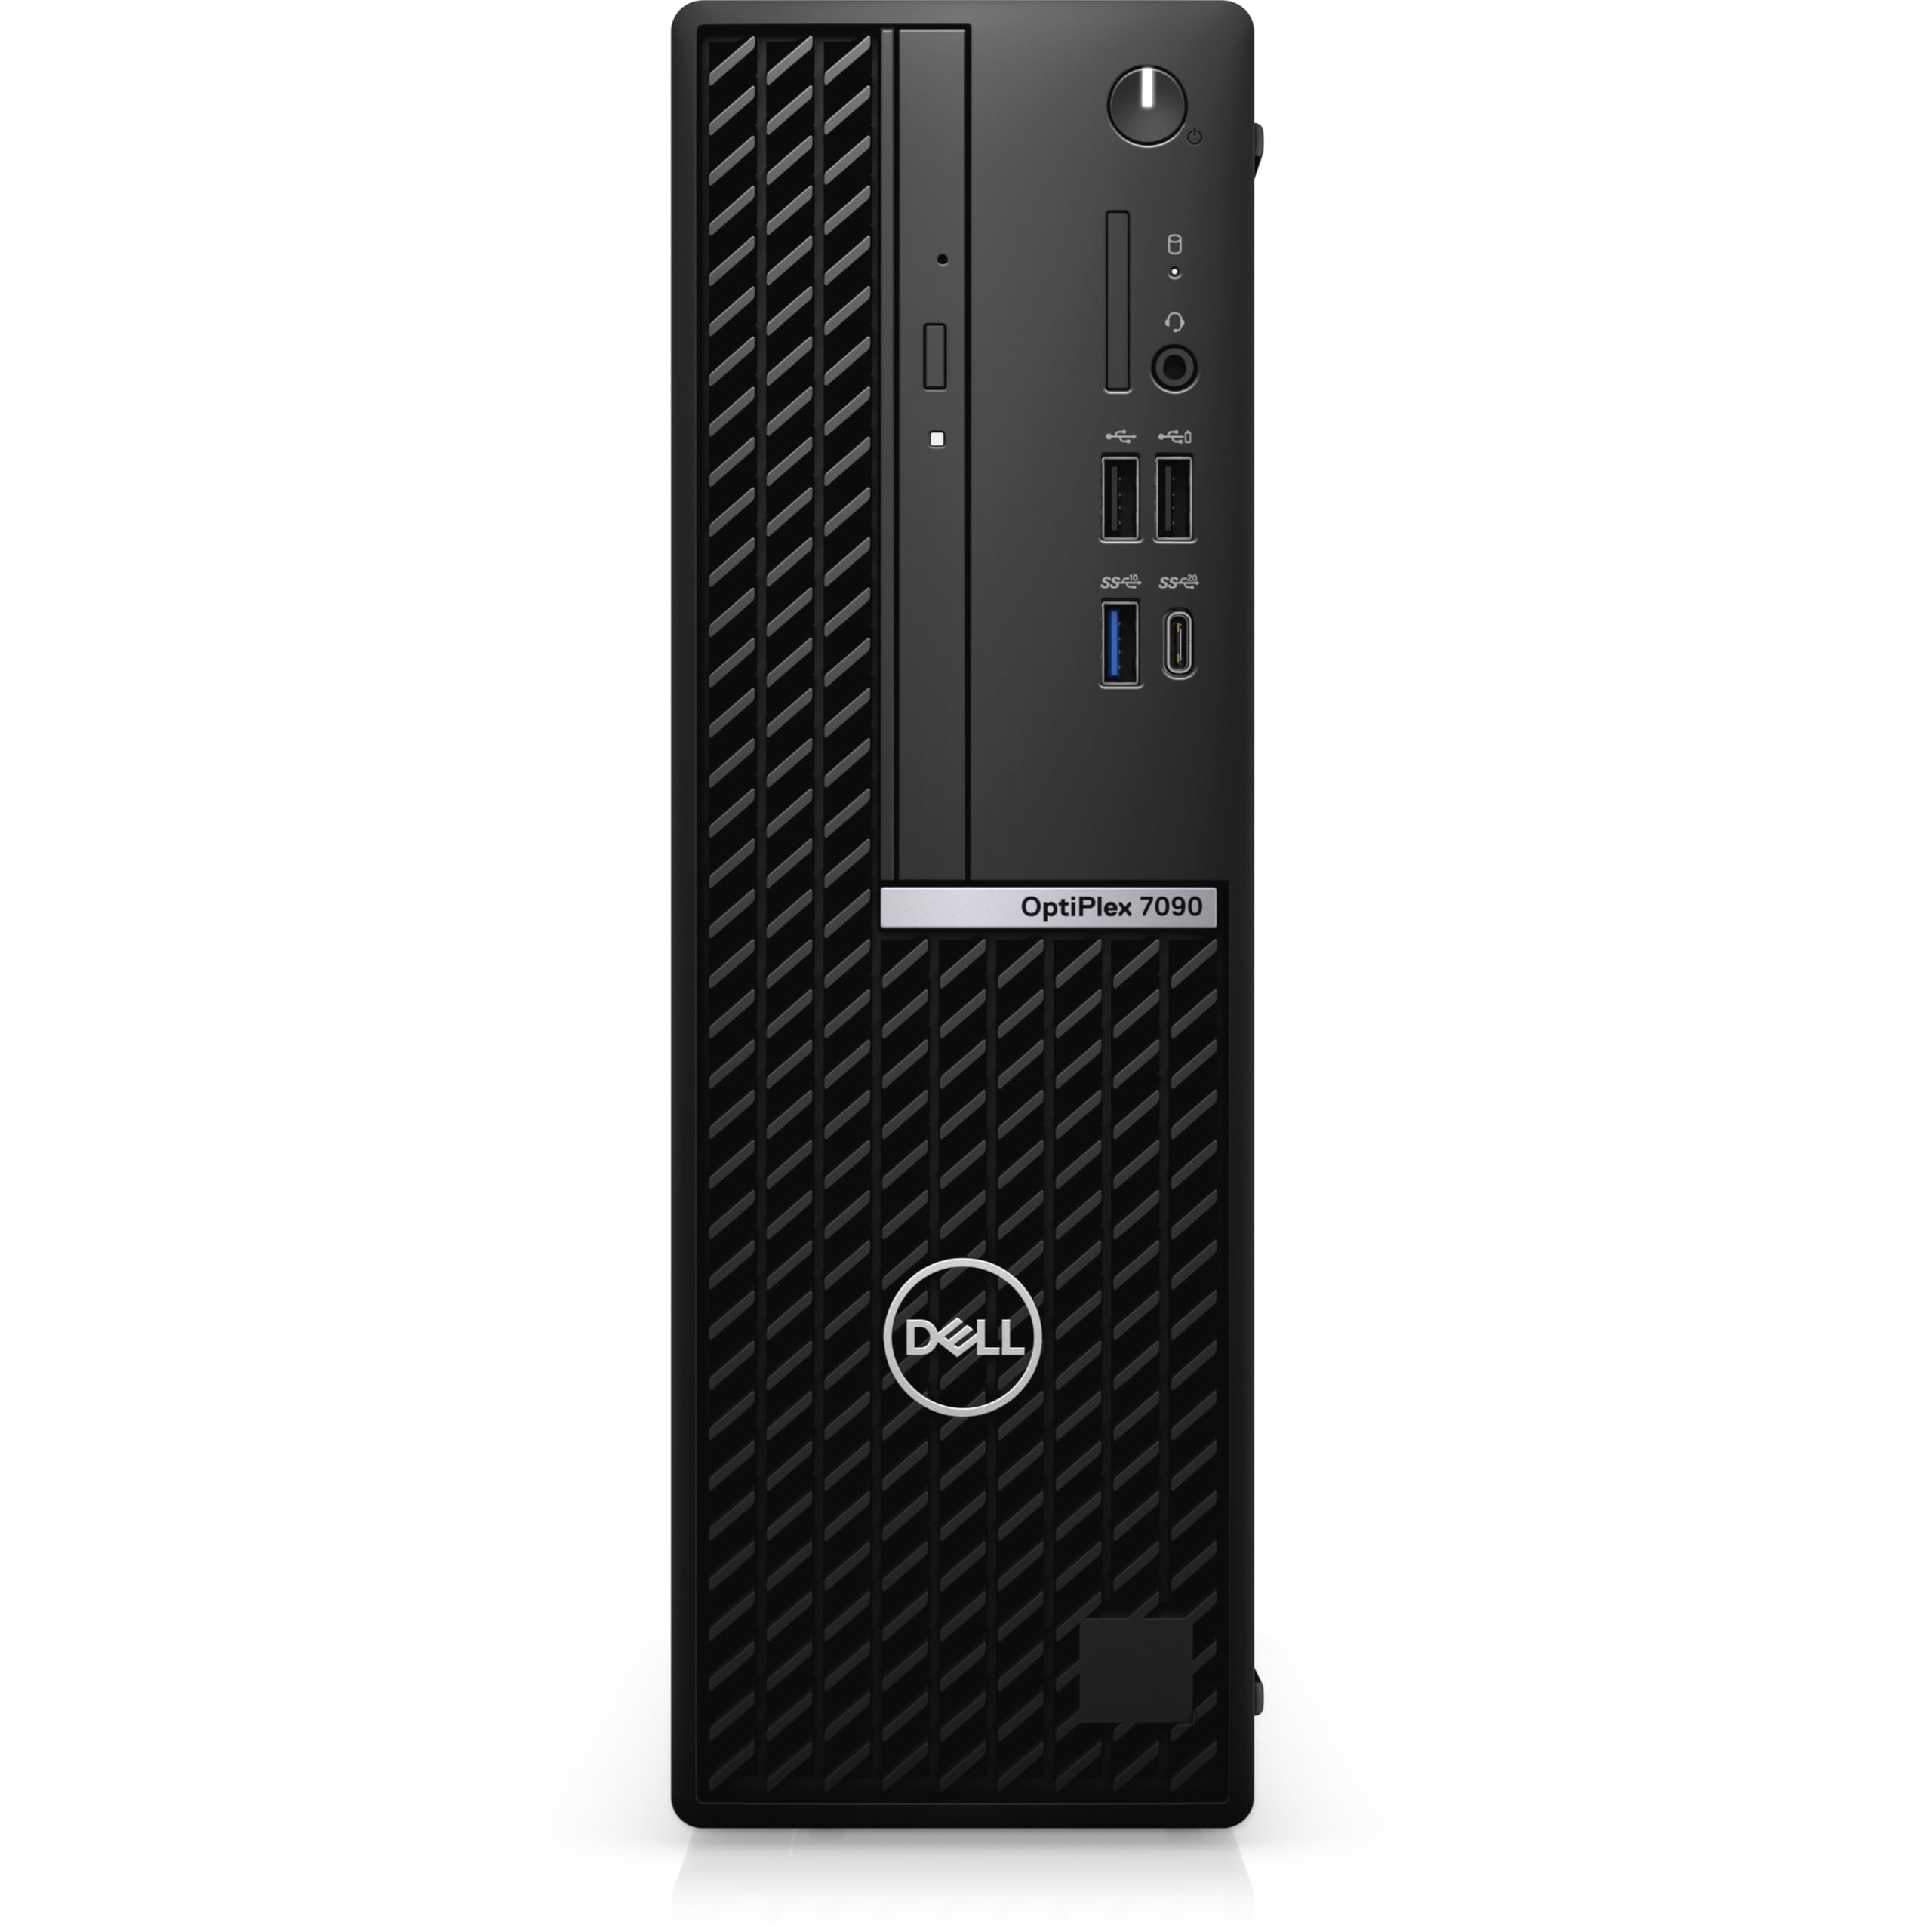 Dell OptiPlex 7000 7090 SFF Small Form Factor Business Desktop Computer, Intel Octa-Core i7-11700 Up to 4.9GHz, 32GB DDR4 RAM, 2TB PCIe SSD, DVDRW, WiFi, Bluetooth, Keyboard & Mouse, Windows 11 Pro